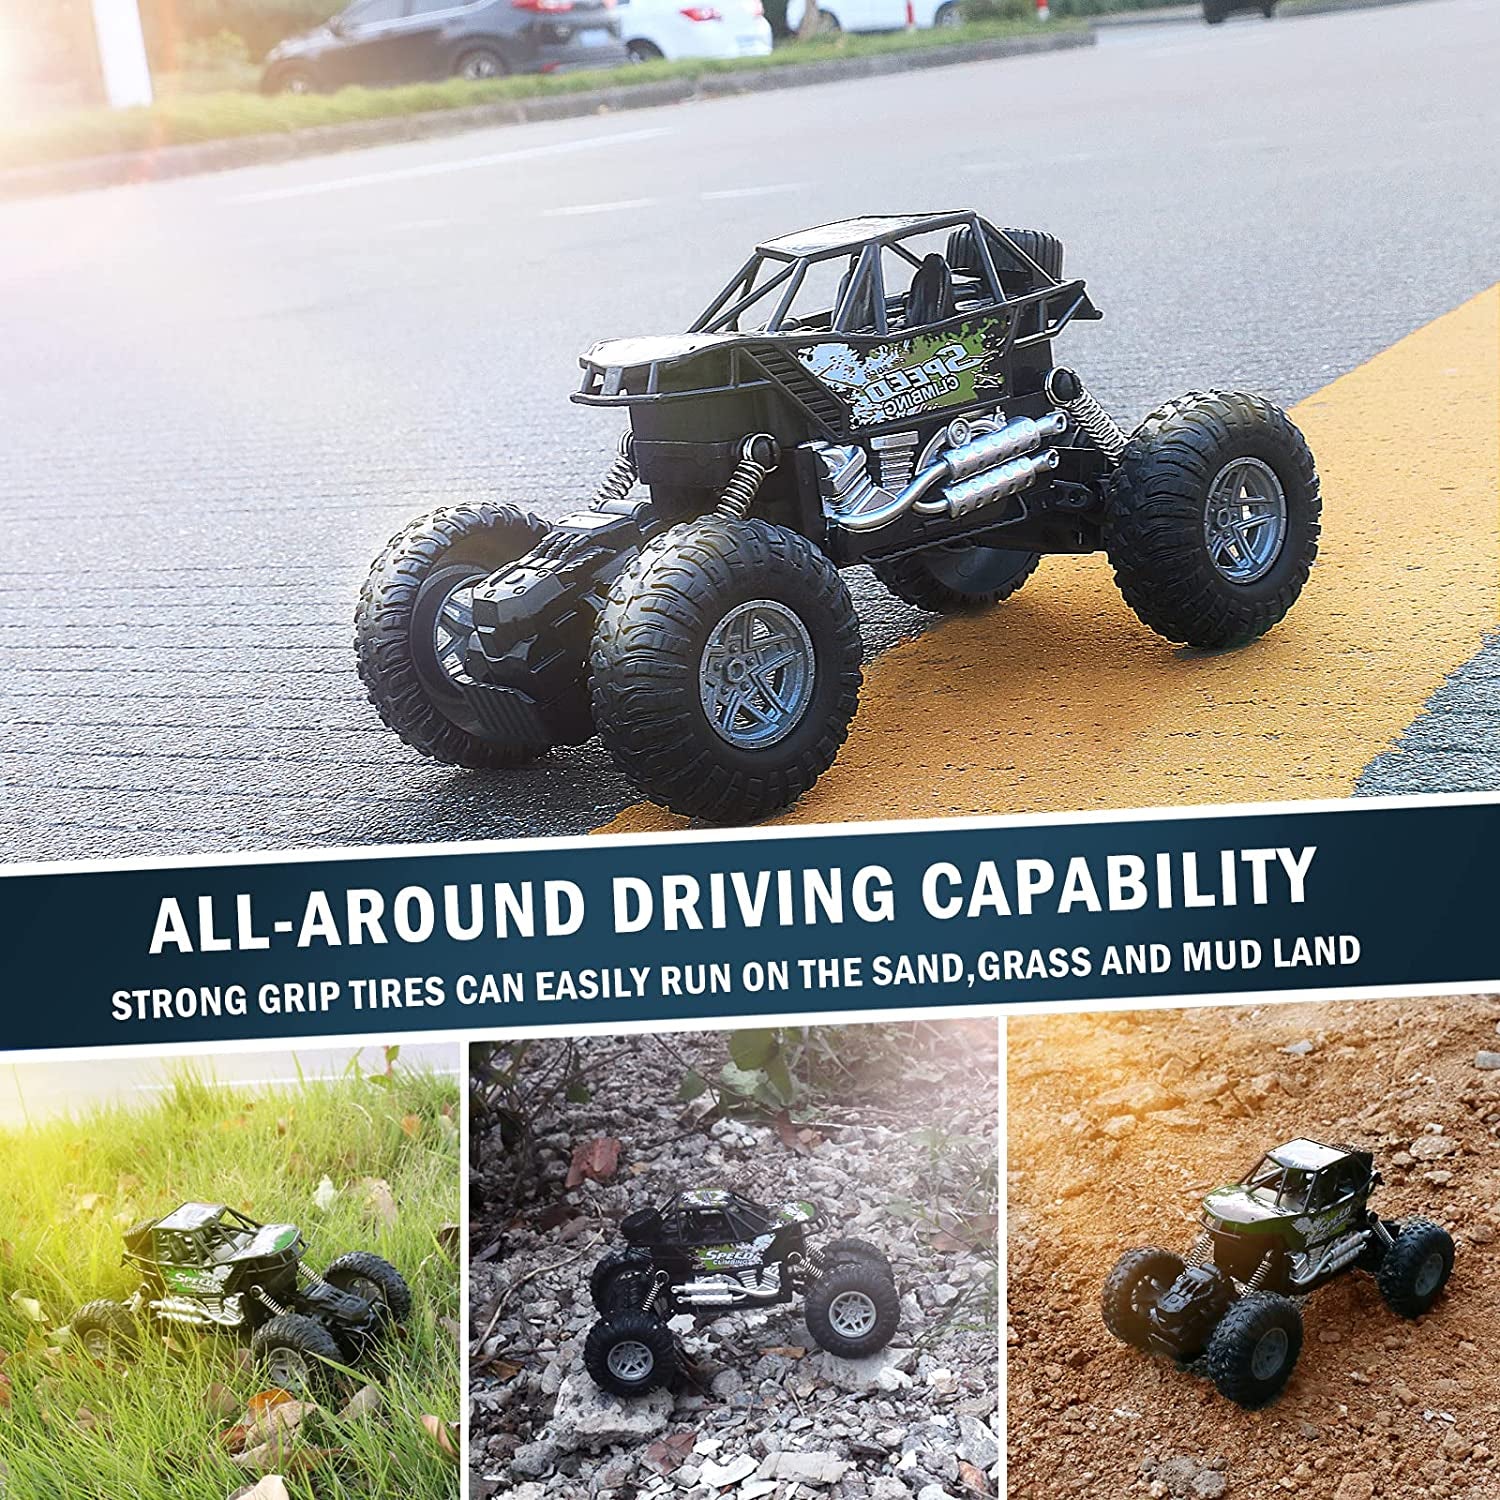 1:18 Scale All Terrains RC Monster Vehicle Truck Crawler, 4WD High Speed Electric Vehicle with Remote Control, off Road Truck with Two Rechargeable Batteries for Boys Kids and Adults(Green)